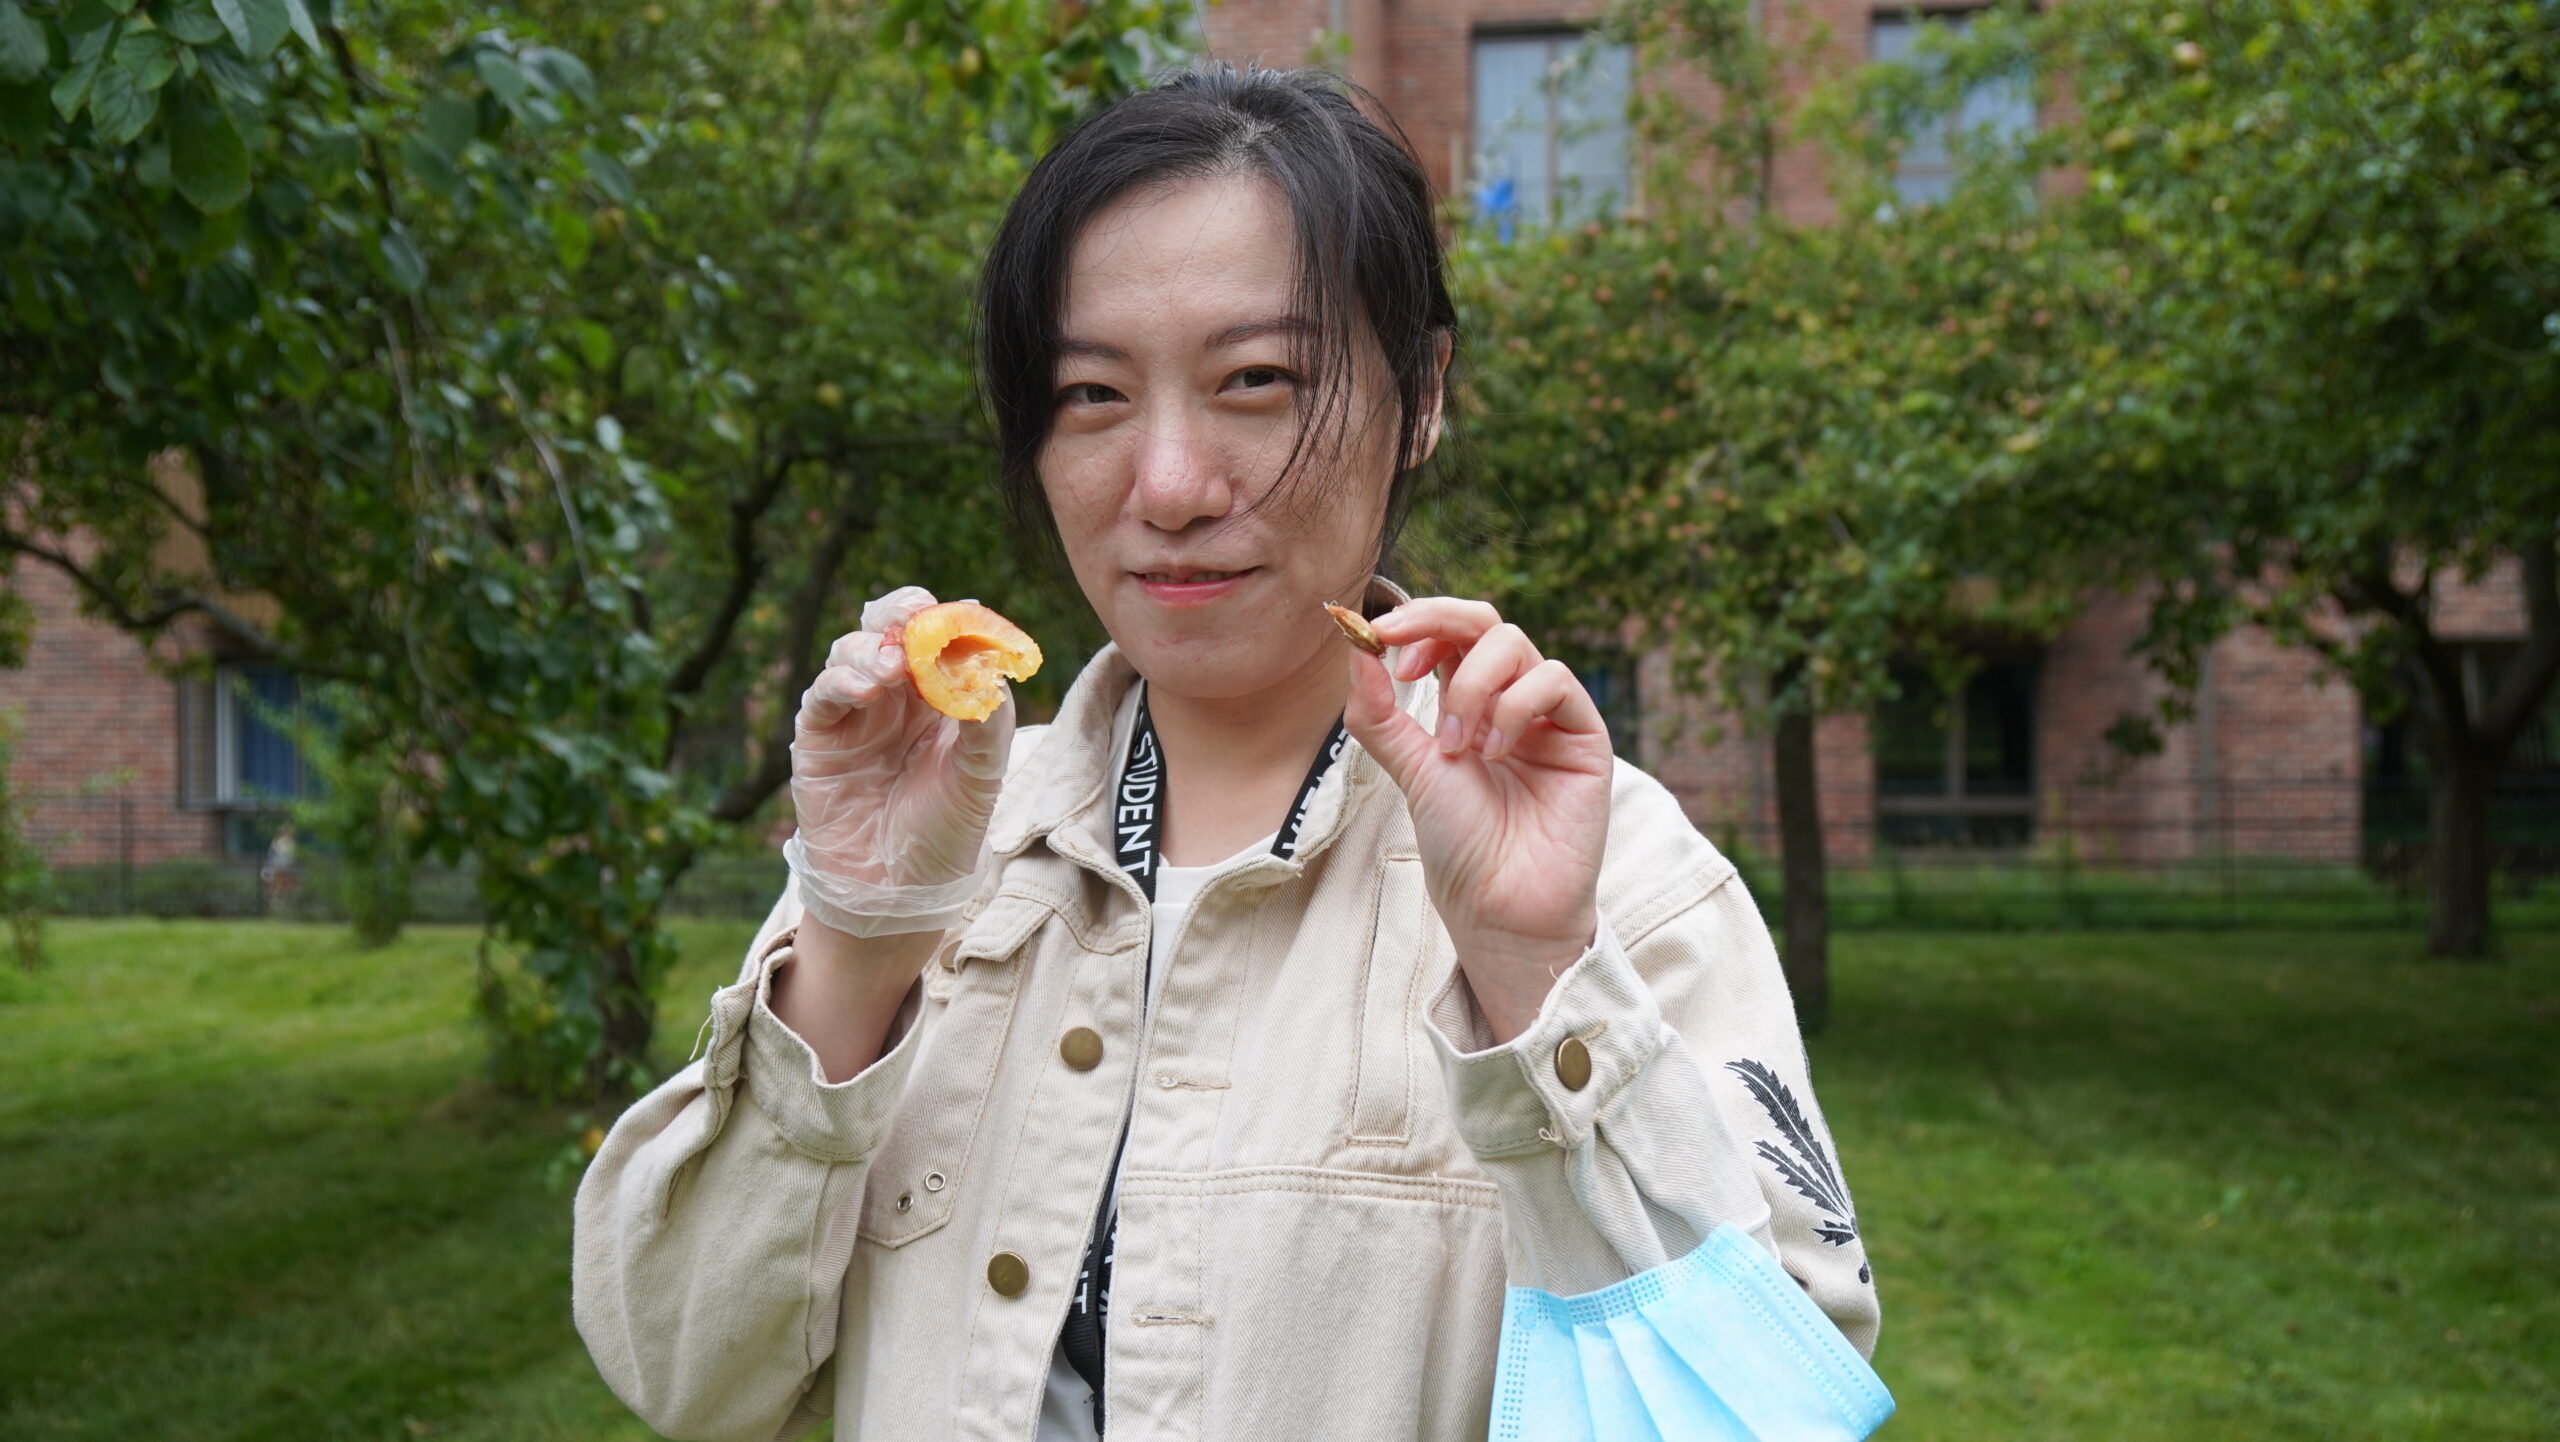 A woman is eating a piece of fruit.